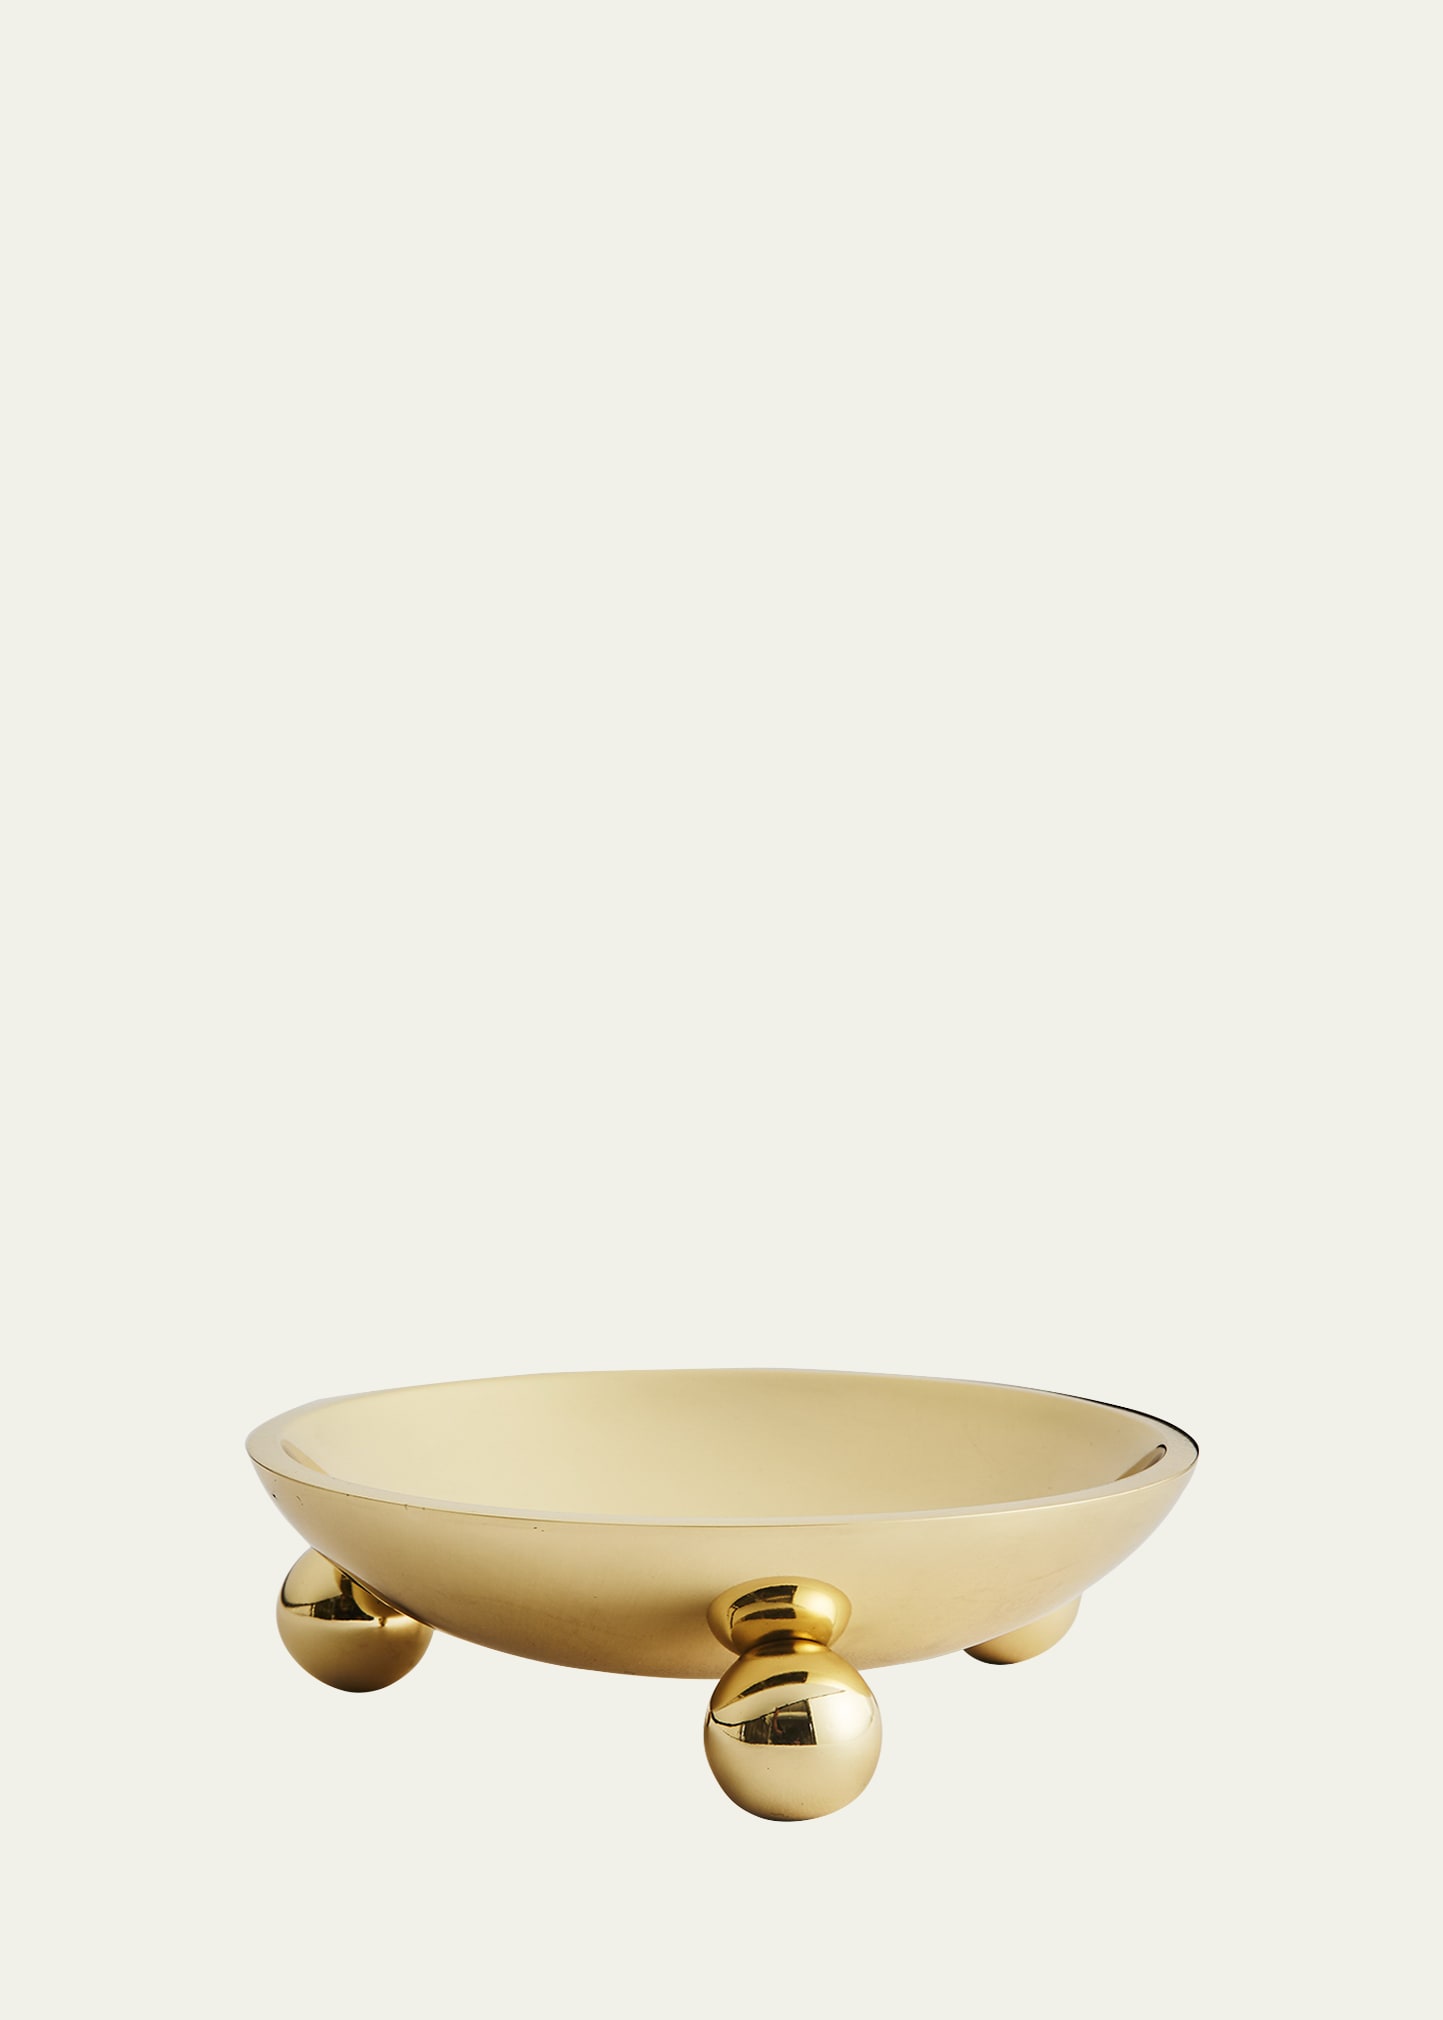 Greg Natale Boule Brass Bowl, 6" Round In Gold